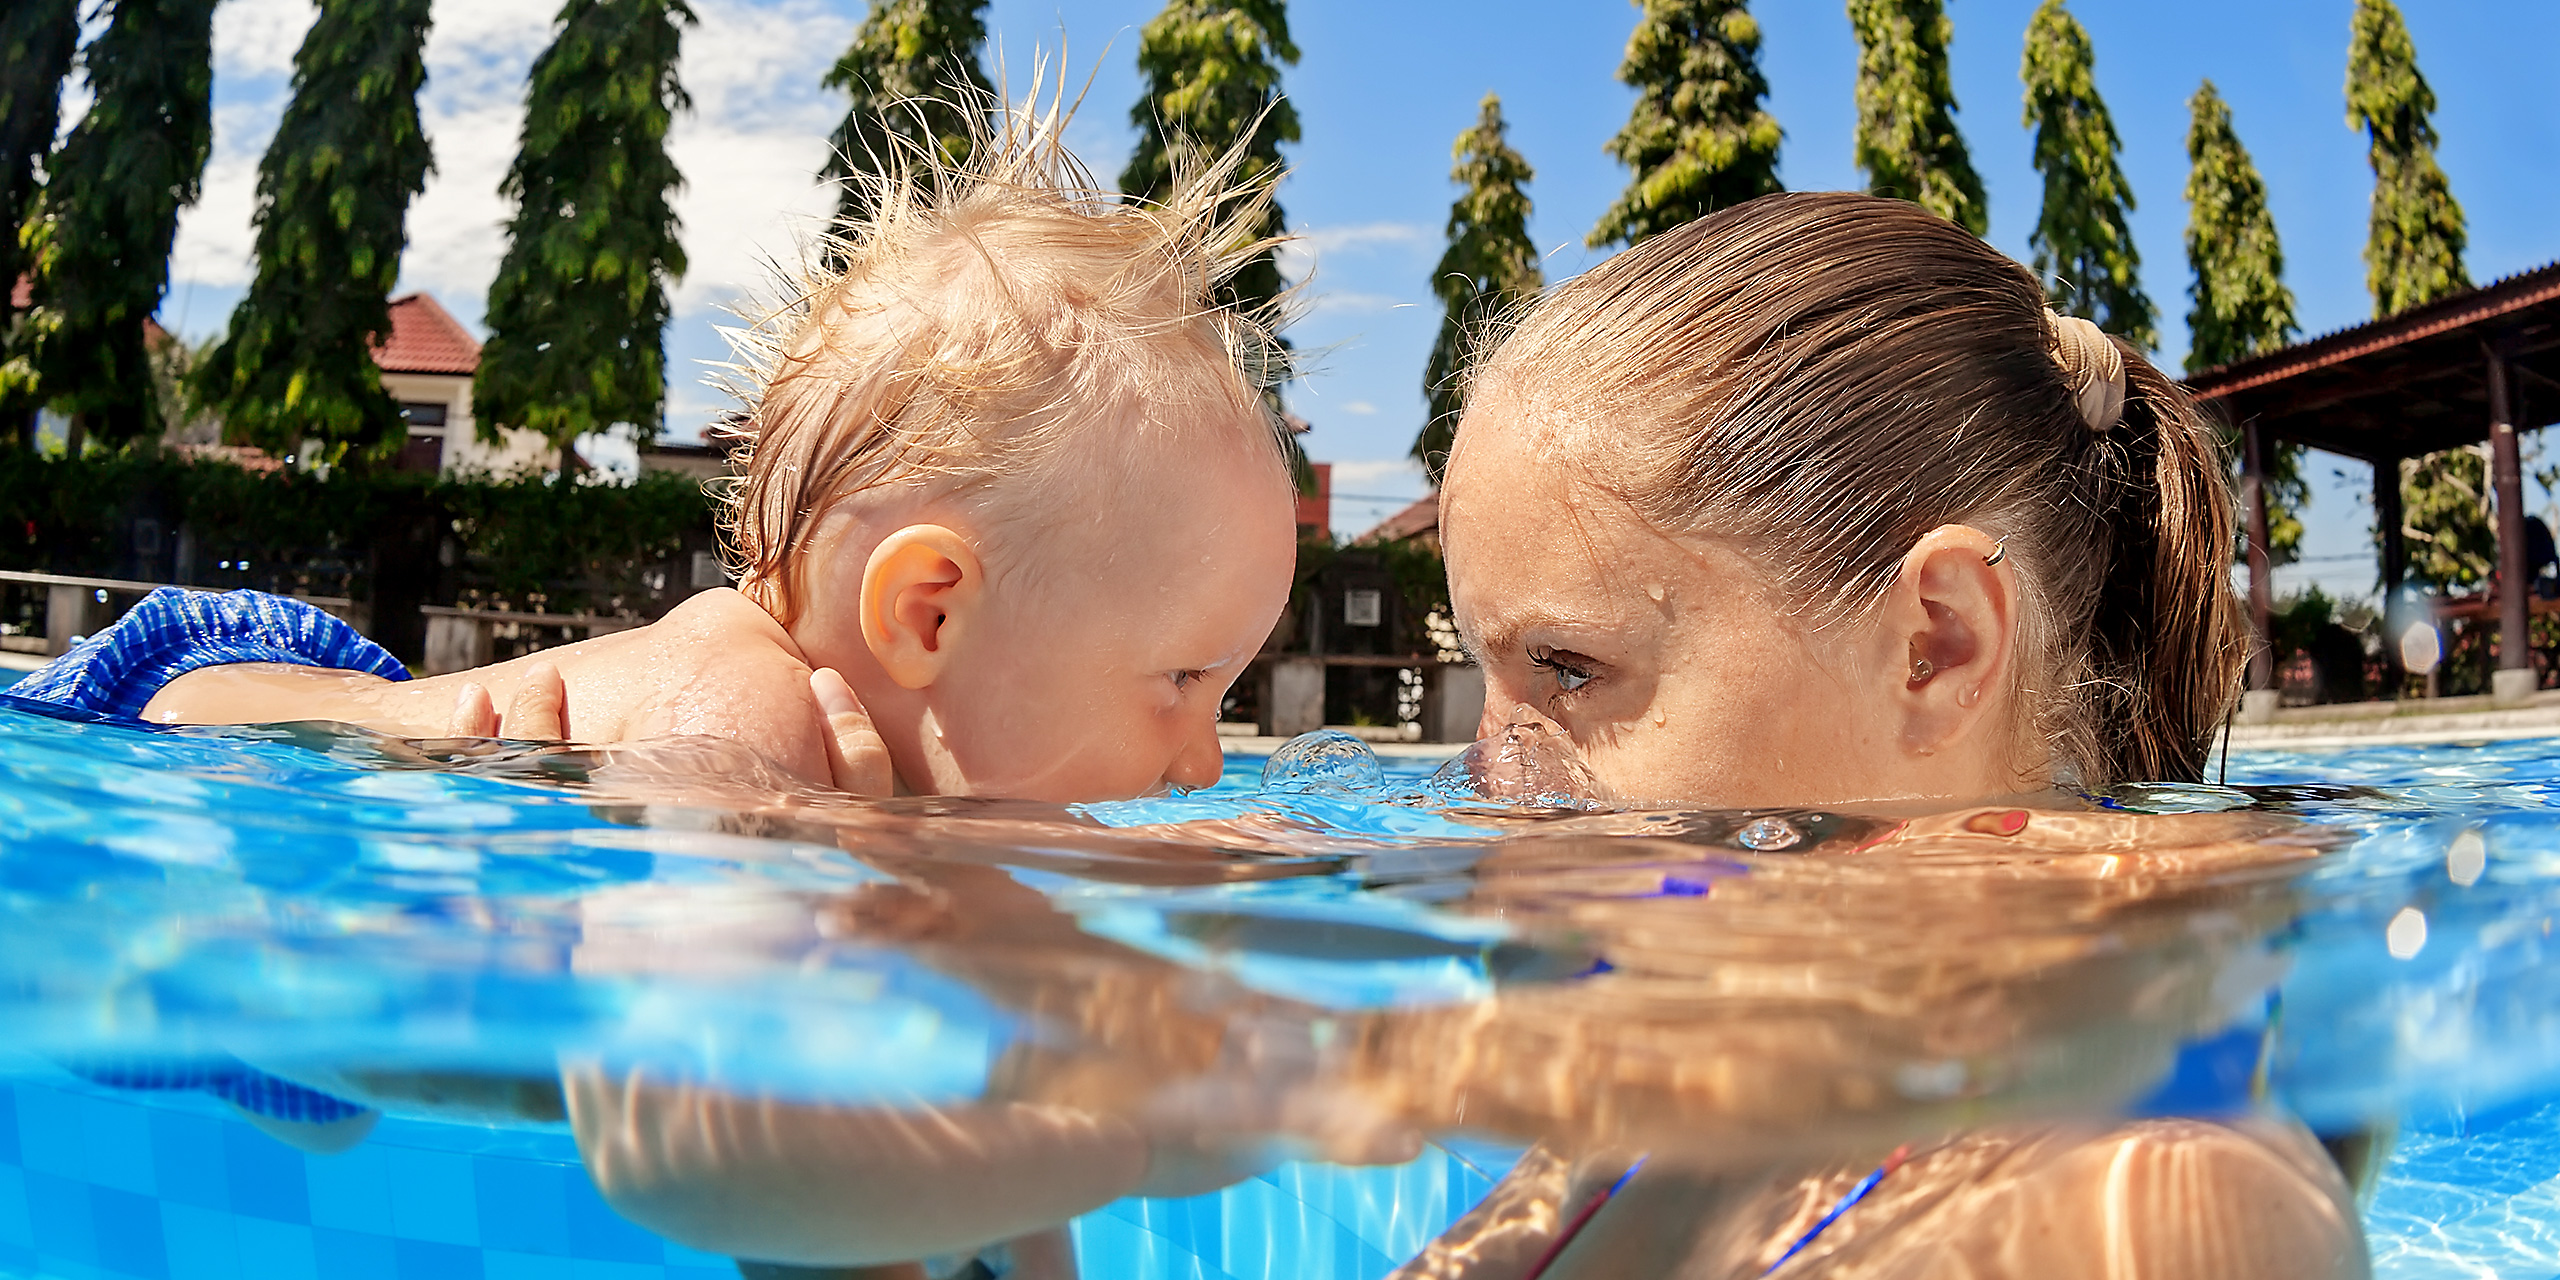 baby swimming pool; Courtesy of Tropical studio/Shutterstock.com